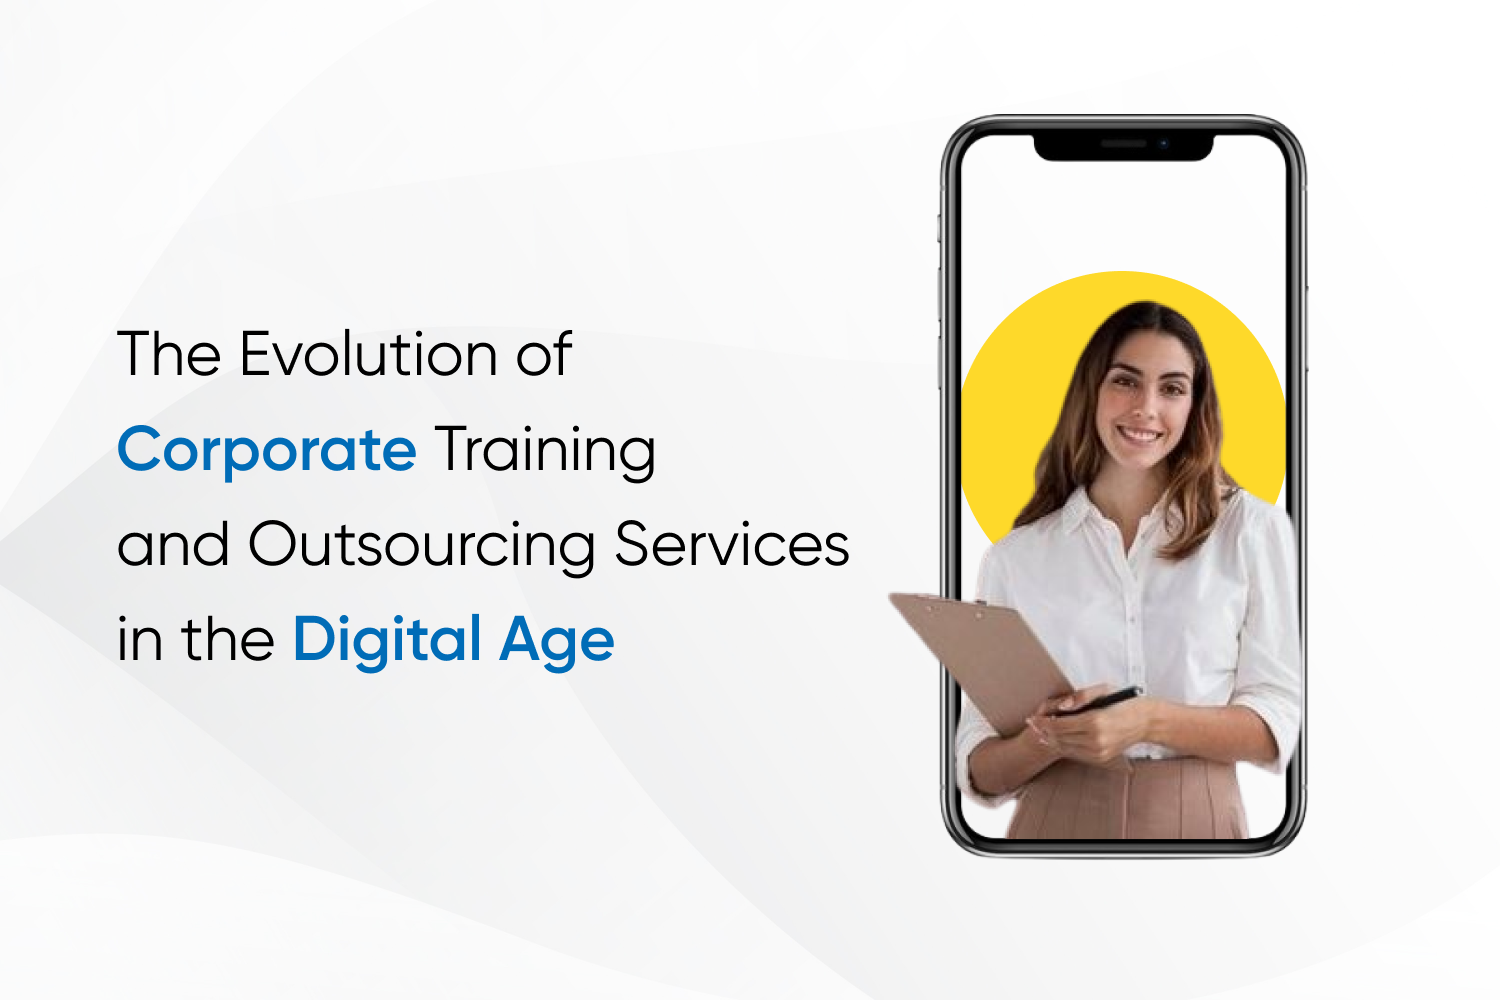 The Evolution of Corporate Training and Outsourcing Services in the Digital Age